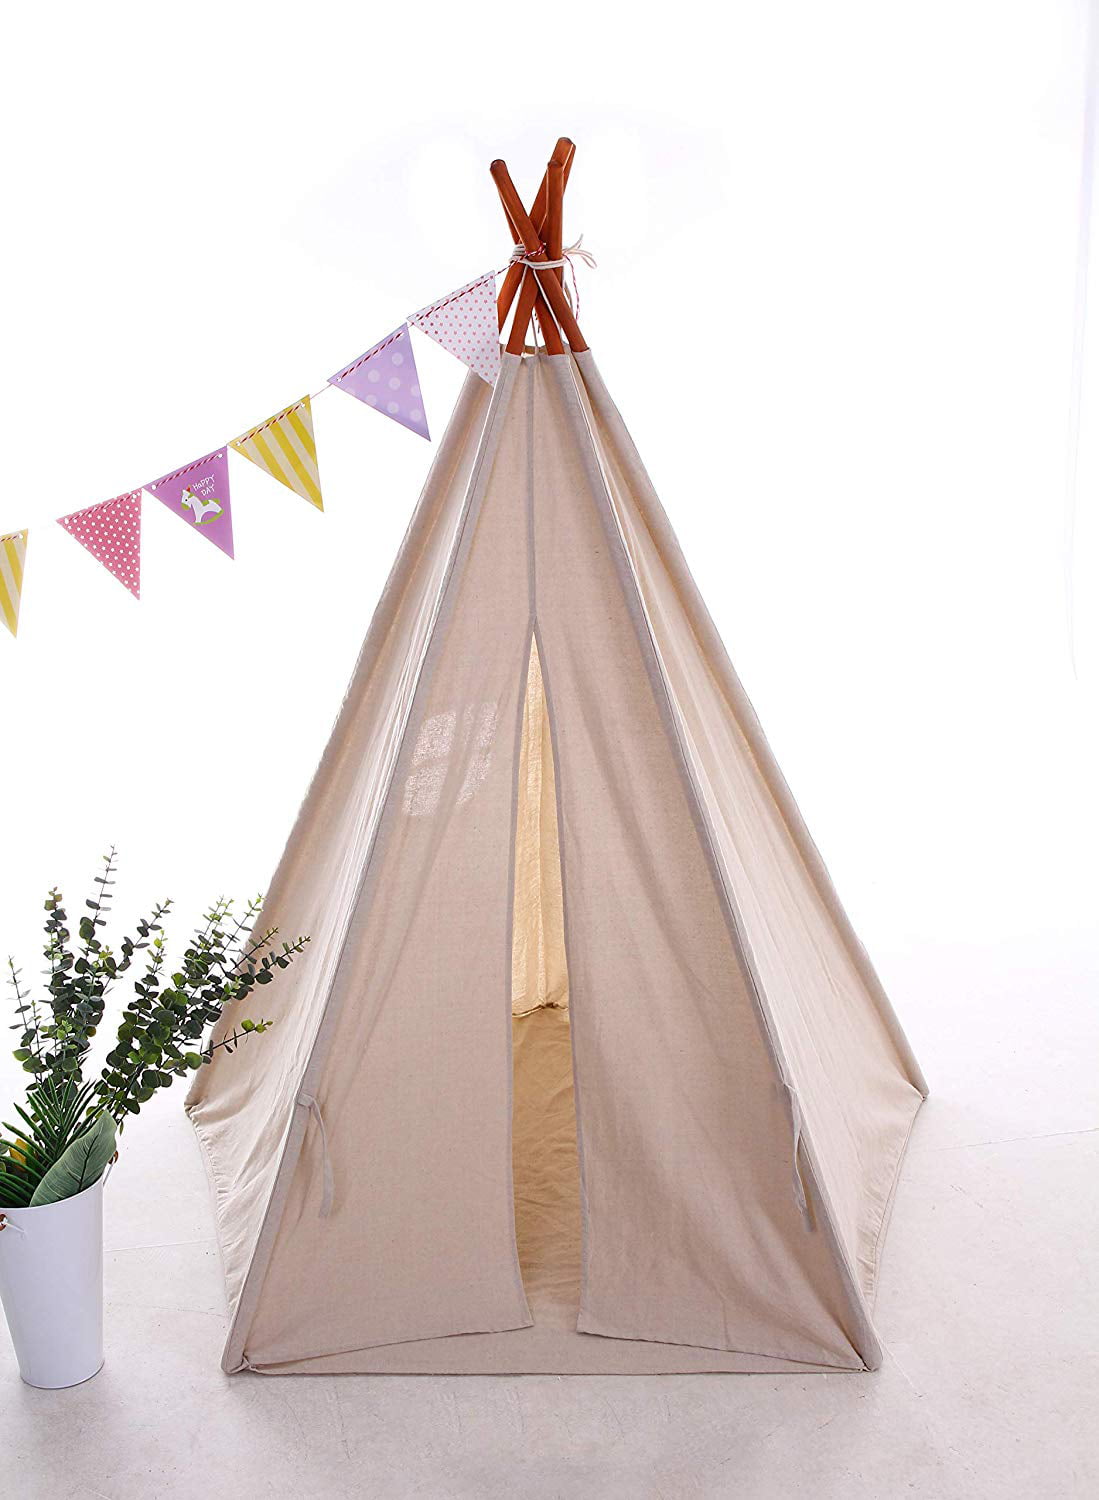 Teepee Tent with Carry Bag & Brick Red Stars Toddlers Teepee Play Tent for Girls and Boys Indoor and Outdoor Kids Playhouse Amazing Toys and Gift for Child Aged 3+ Red Brick Stars 